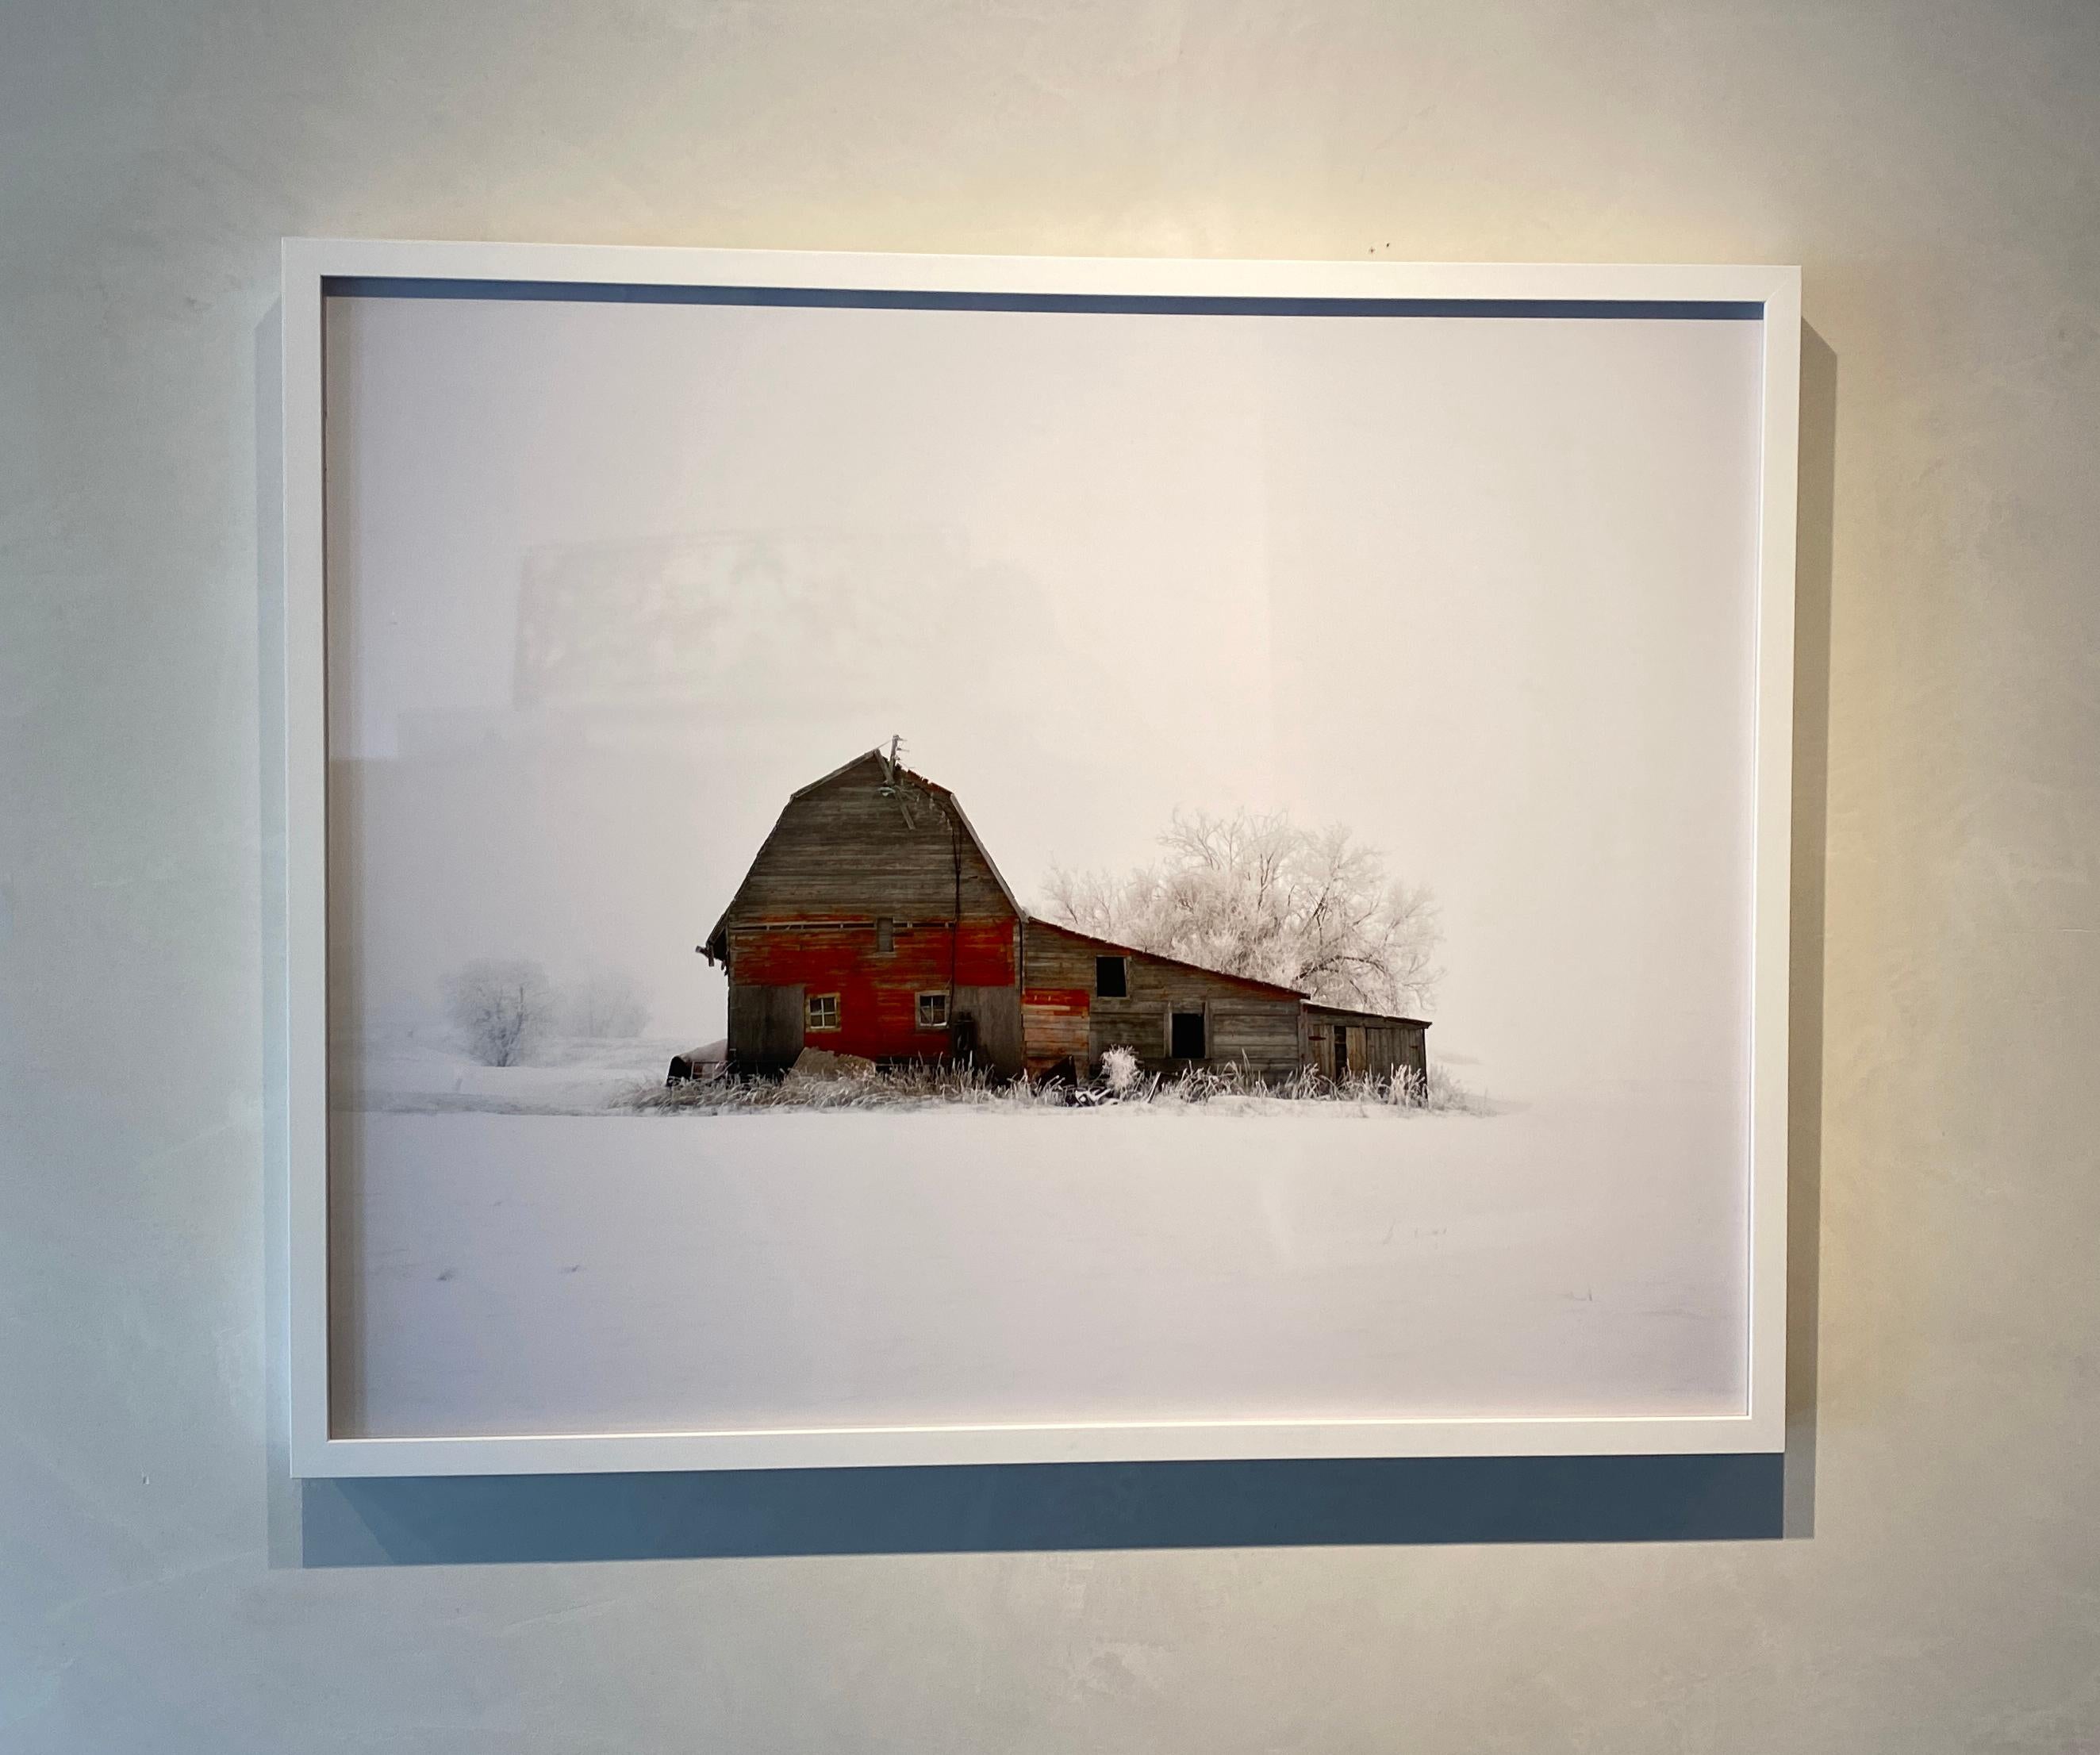 This framed archival pigment print by David Burdeny was taken in Saskatchewan, Canada.
Framed in white. 
Dimensions listed are for framed size. 
Part of an edition of 7

David Burdeny is a photographer from Canada who travels the world capturing